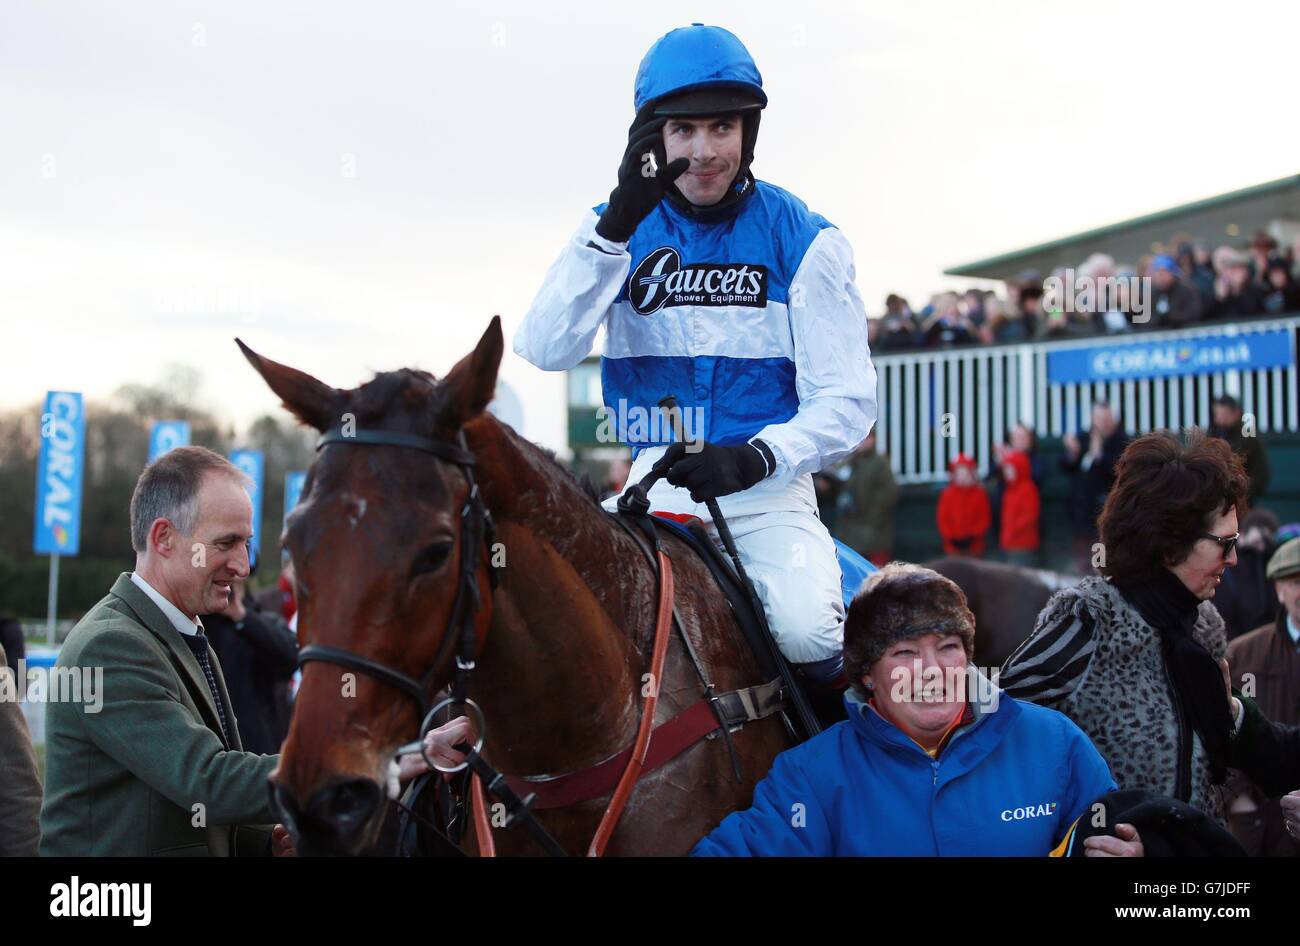 Jockey Aidan Coleman acknowledges the crowd after his victory on Emperor's Choice in the Coral Welsh Grand National during Coral Welsh Grand National Day at Chepstow Racecourse, Chepstow. Stock Photo